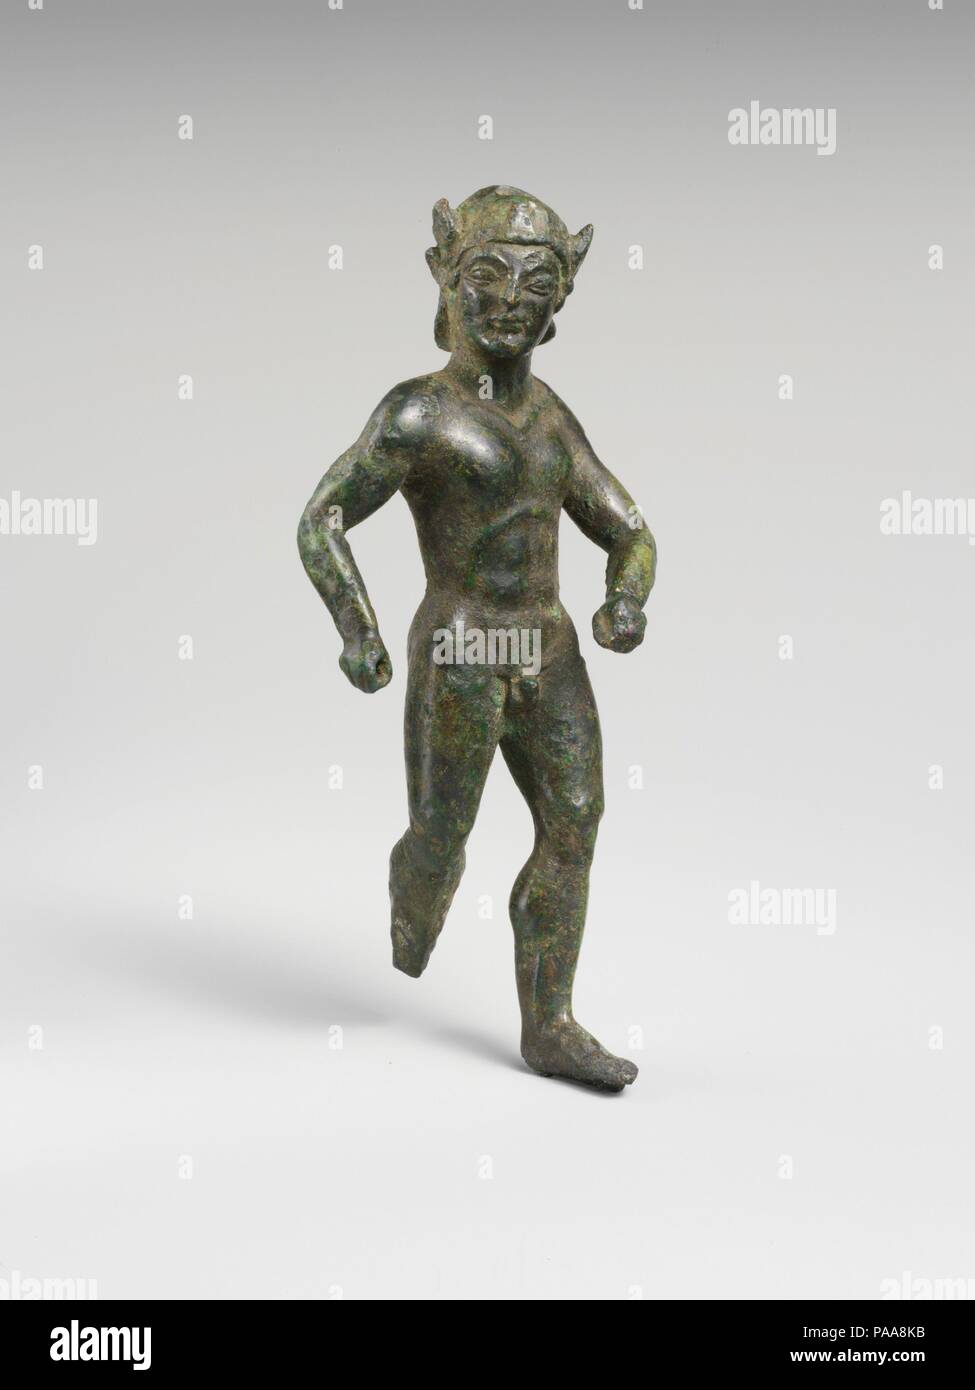 Bronze statuette of a striding warrior. Culture: Etruscan. Dimensions: H.: 4 15/16 in. (12.5 cm). Date: early 5th century B.C..  This striding warrior once held a separately made spear in his right hand and may have carried a shield on his left arm. Museum: Metropolitan Museum of Art, New York, USA. Stock Photo